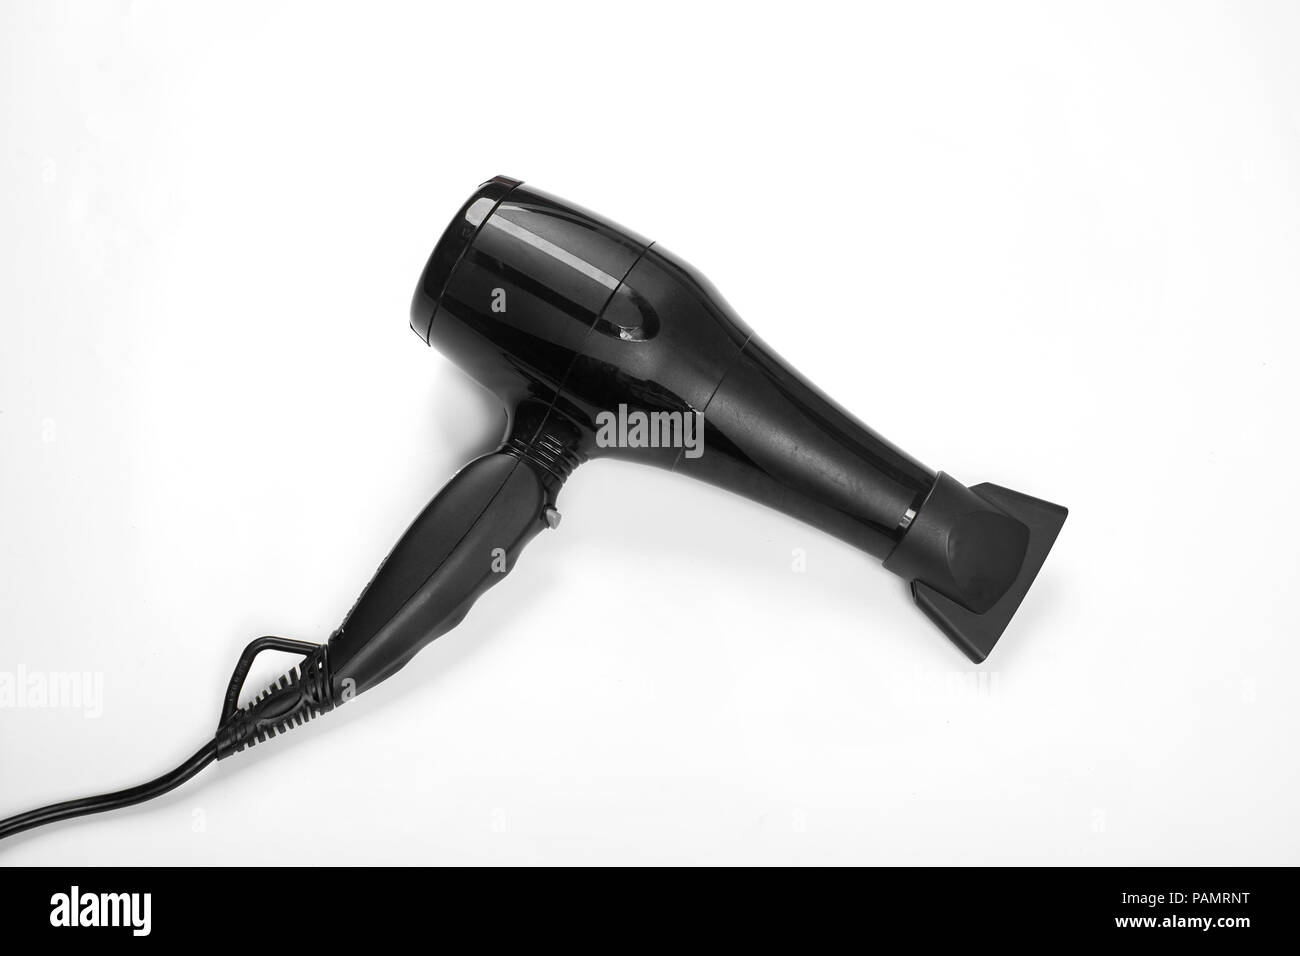 Hair dryer isolated on white background Stock Photo